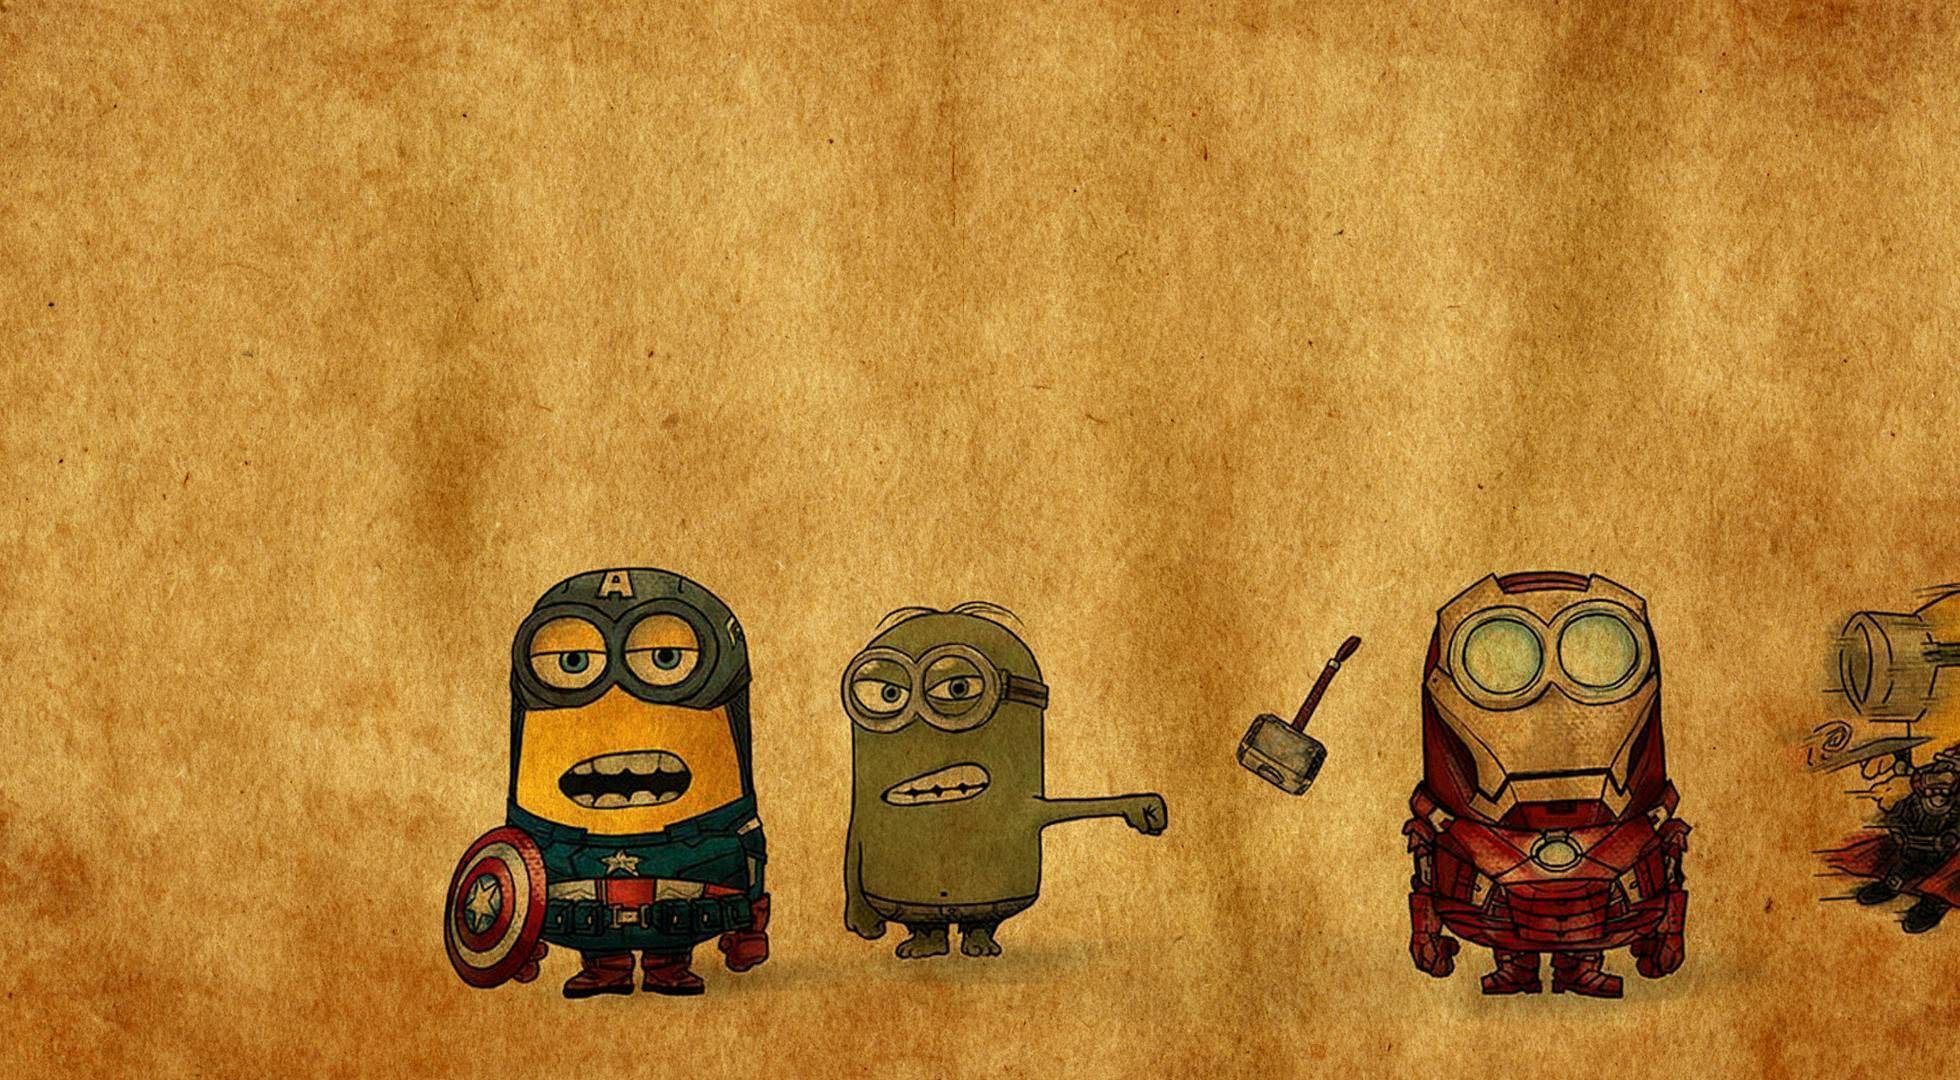 Minions superheroes hd wallpapers wallpapers55.com - Best